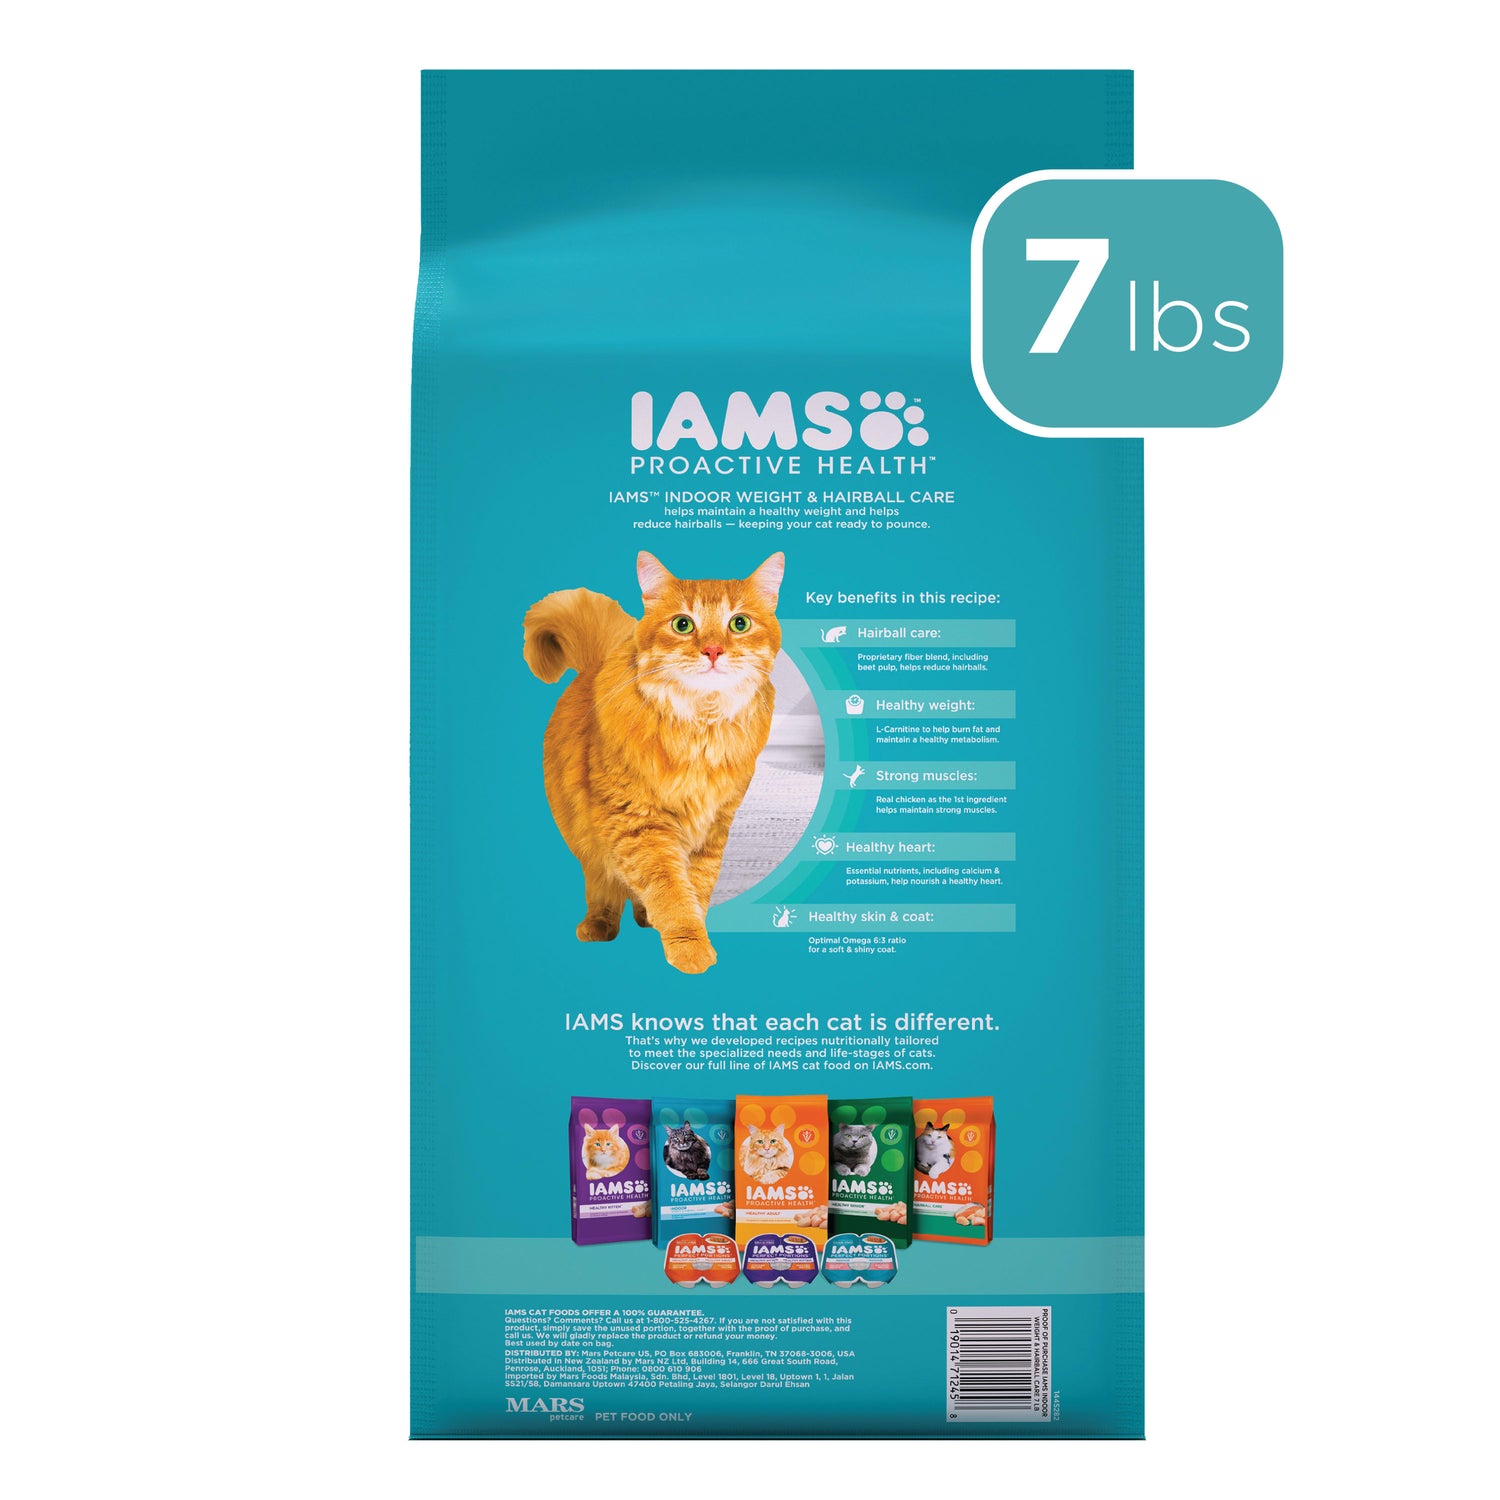 IAMS PROACTIVE HEALTH Adult Indoor Weight Control & Hairball Care Dry Cat Food with Chicken & Turkey Cat Kibble, 7 Lb. Bag